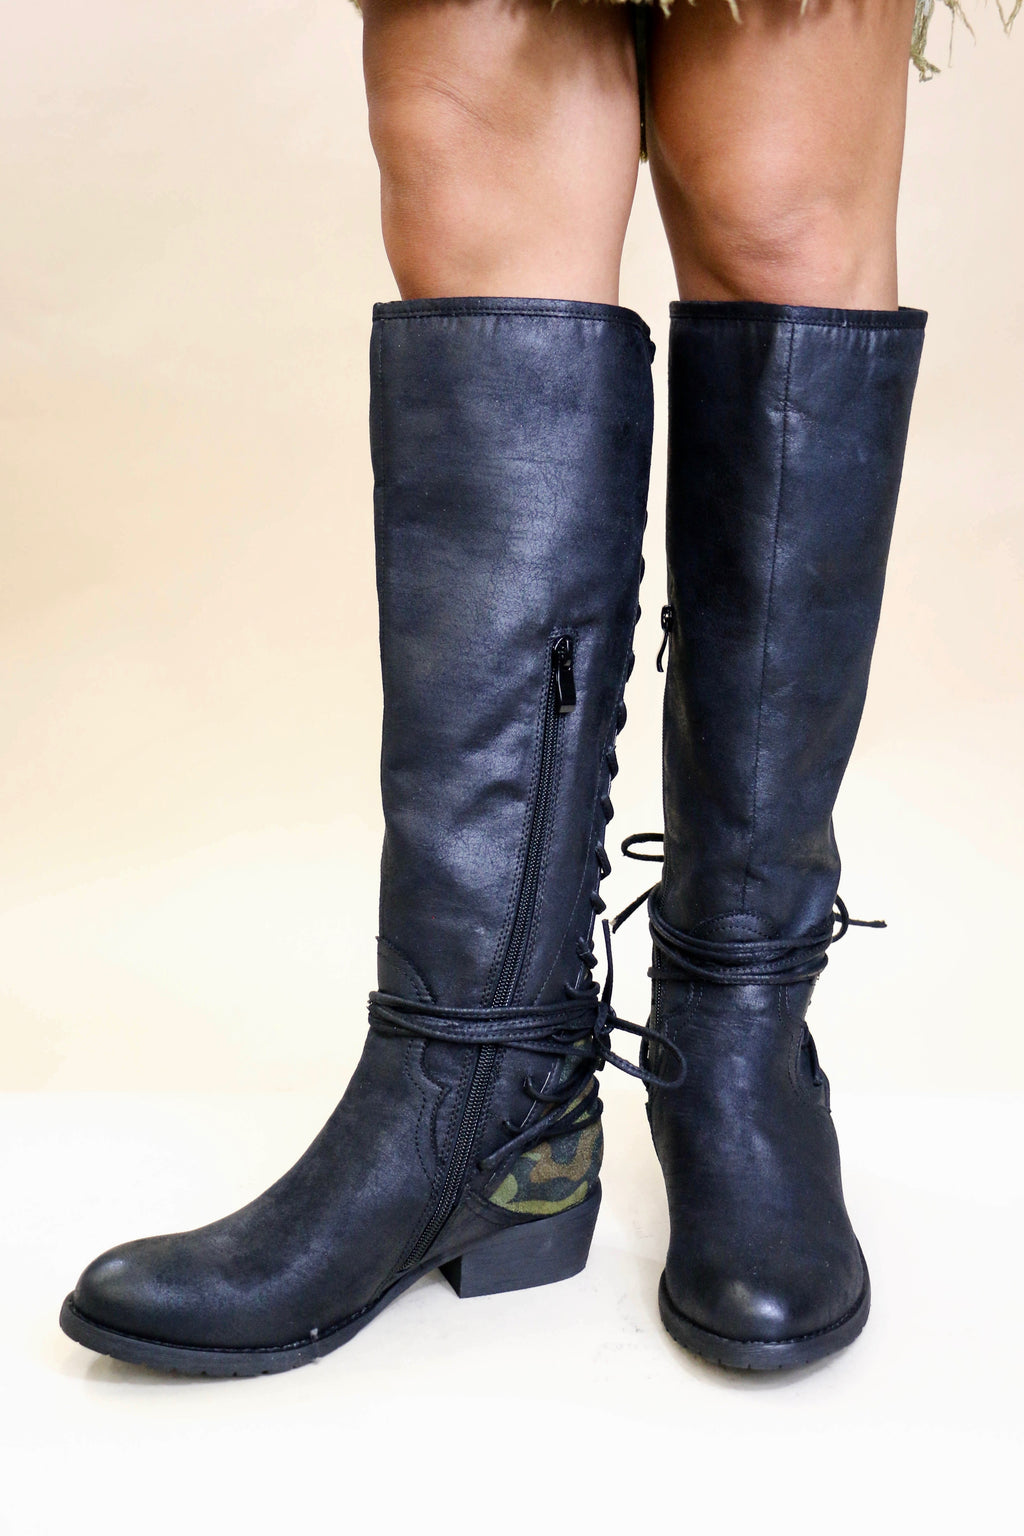 Very Volatile Lace Up Tall Black Boots with Camo Accent